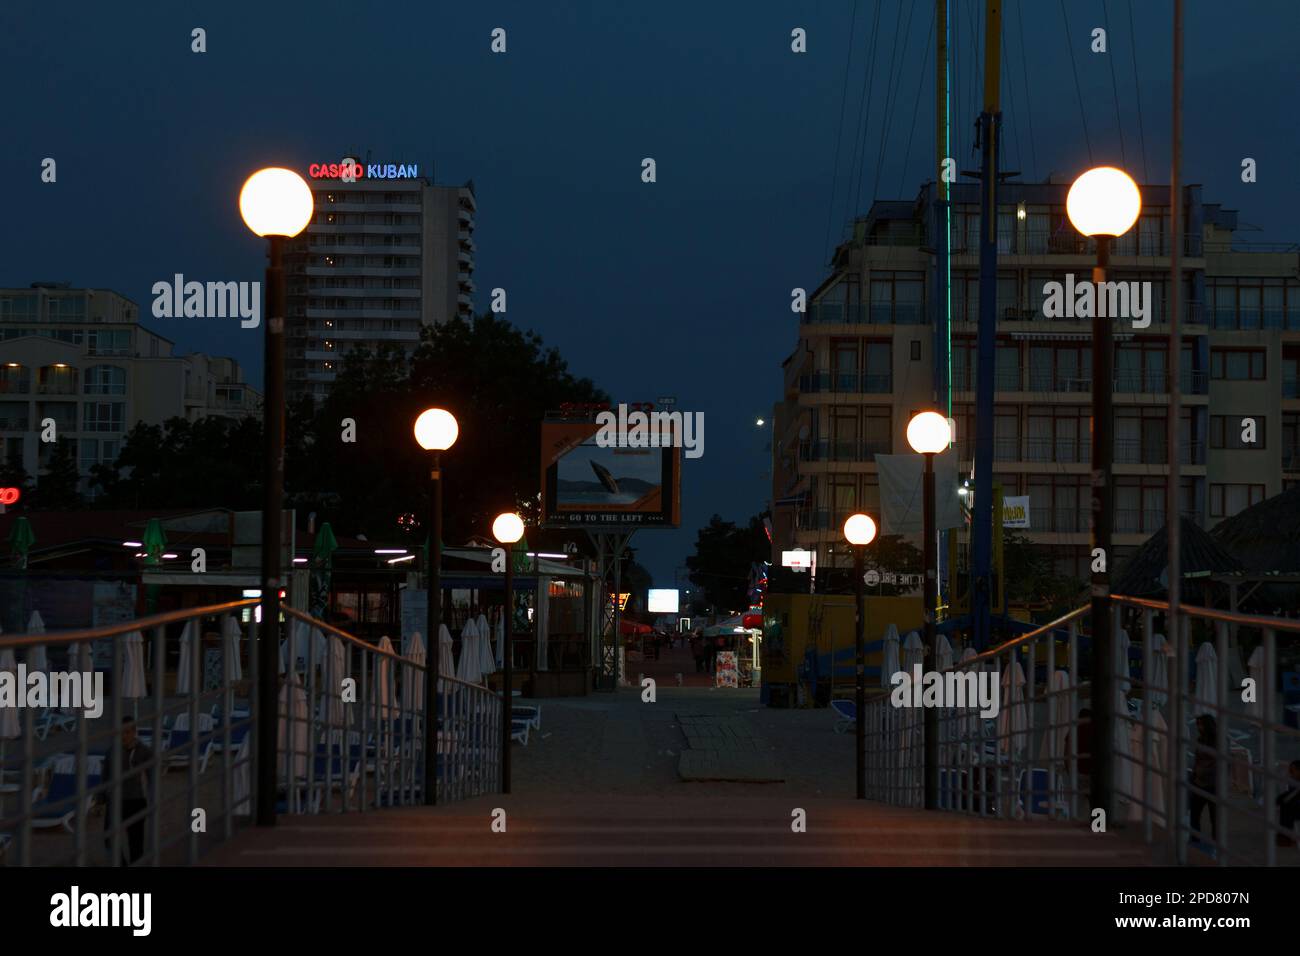 SUNNY BEACH, BULGARIA - JUNE 28, 2015: Resort coastal area, infrastructure with hotels, shops and a beach on the Black Sea in the evening. Lights on t Stock Photo